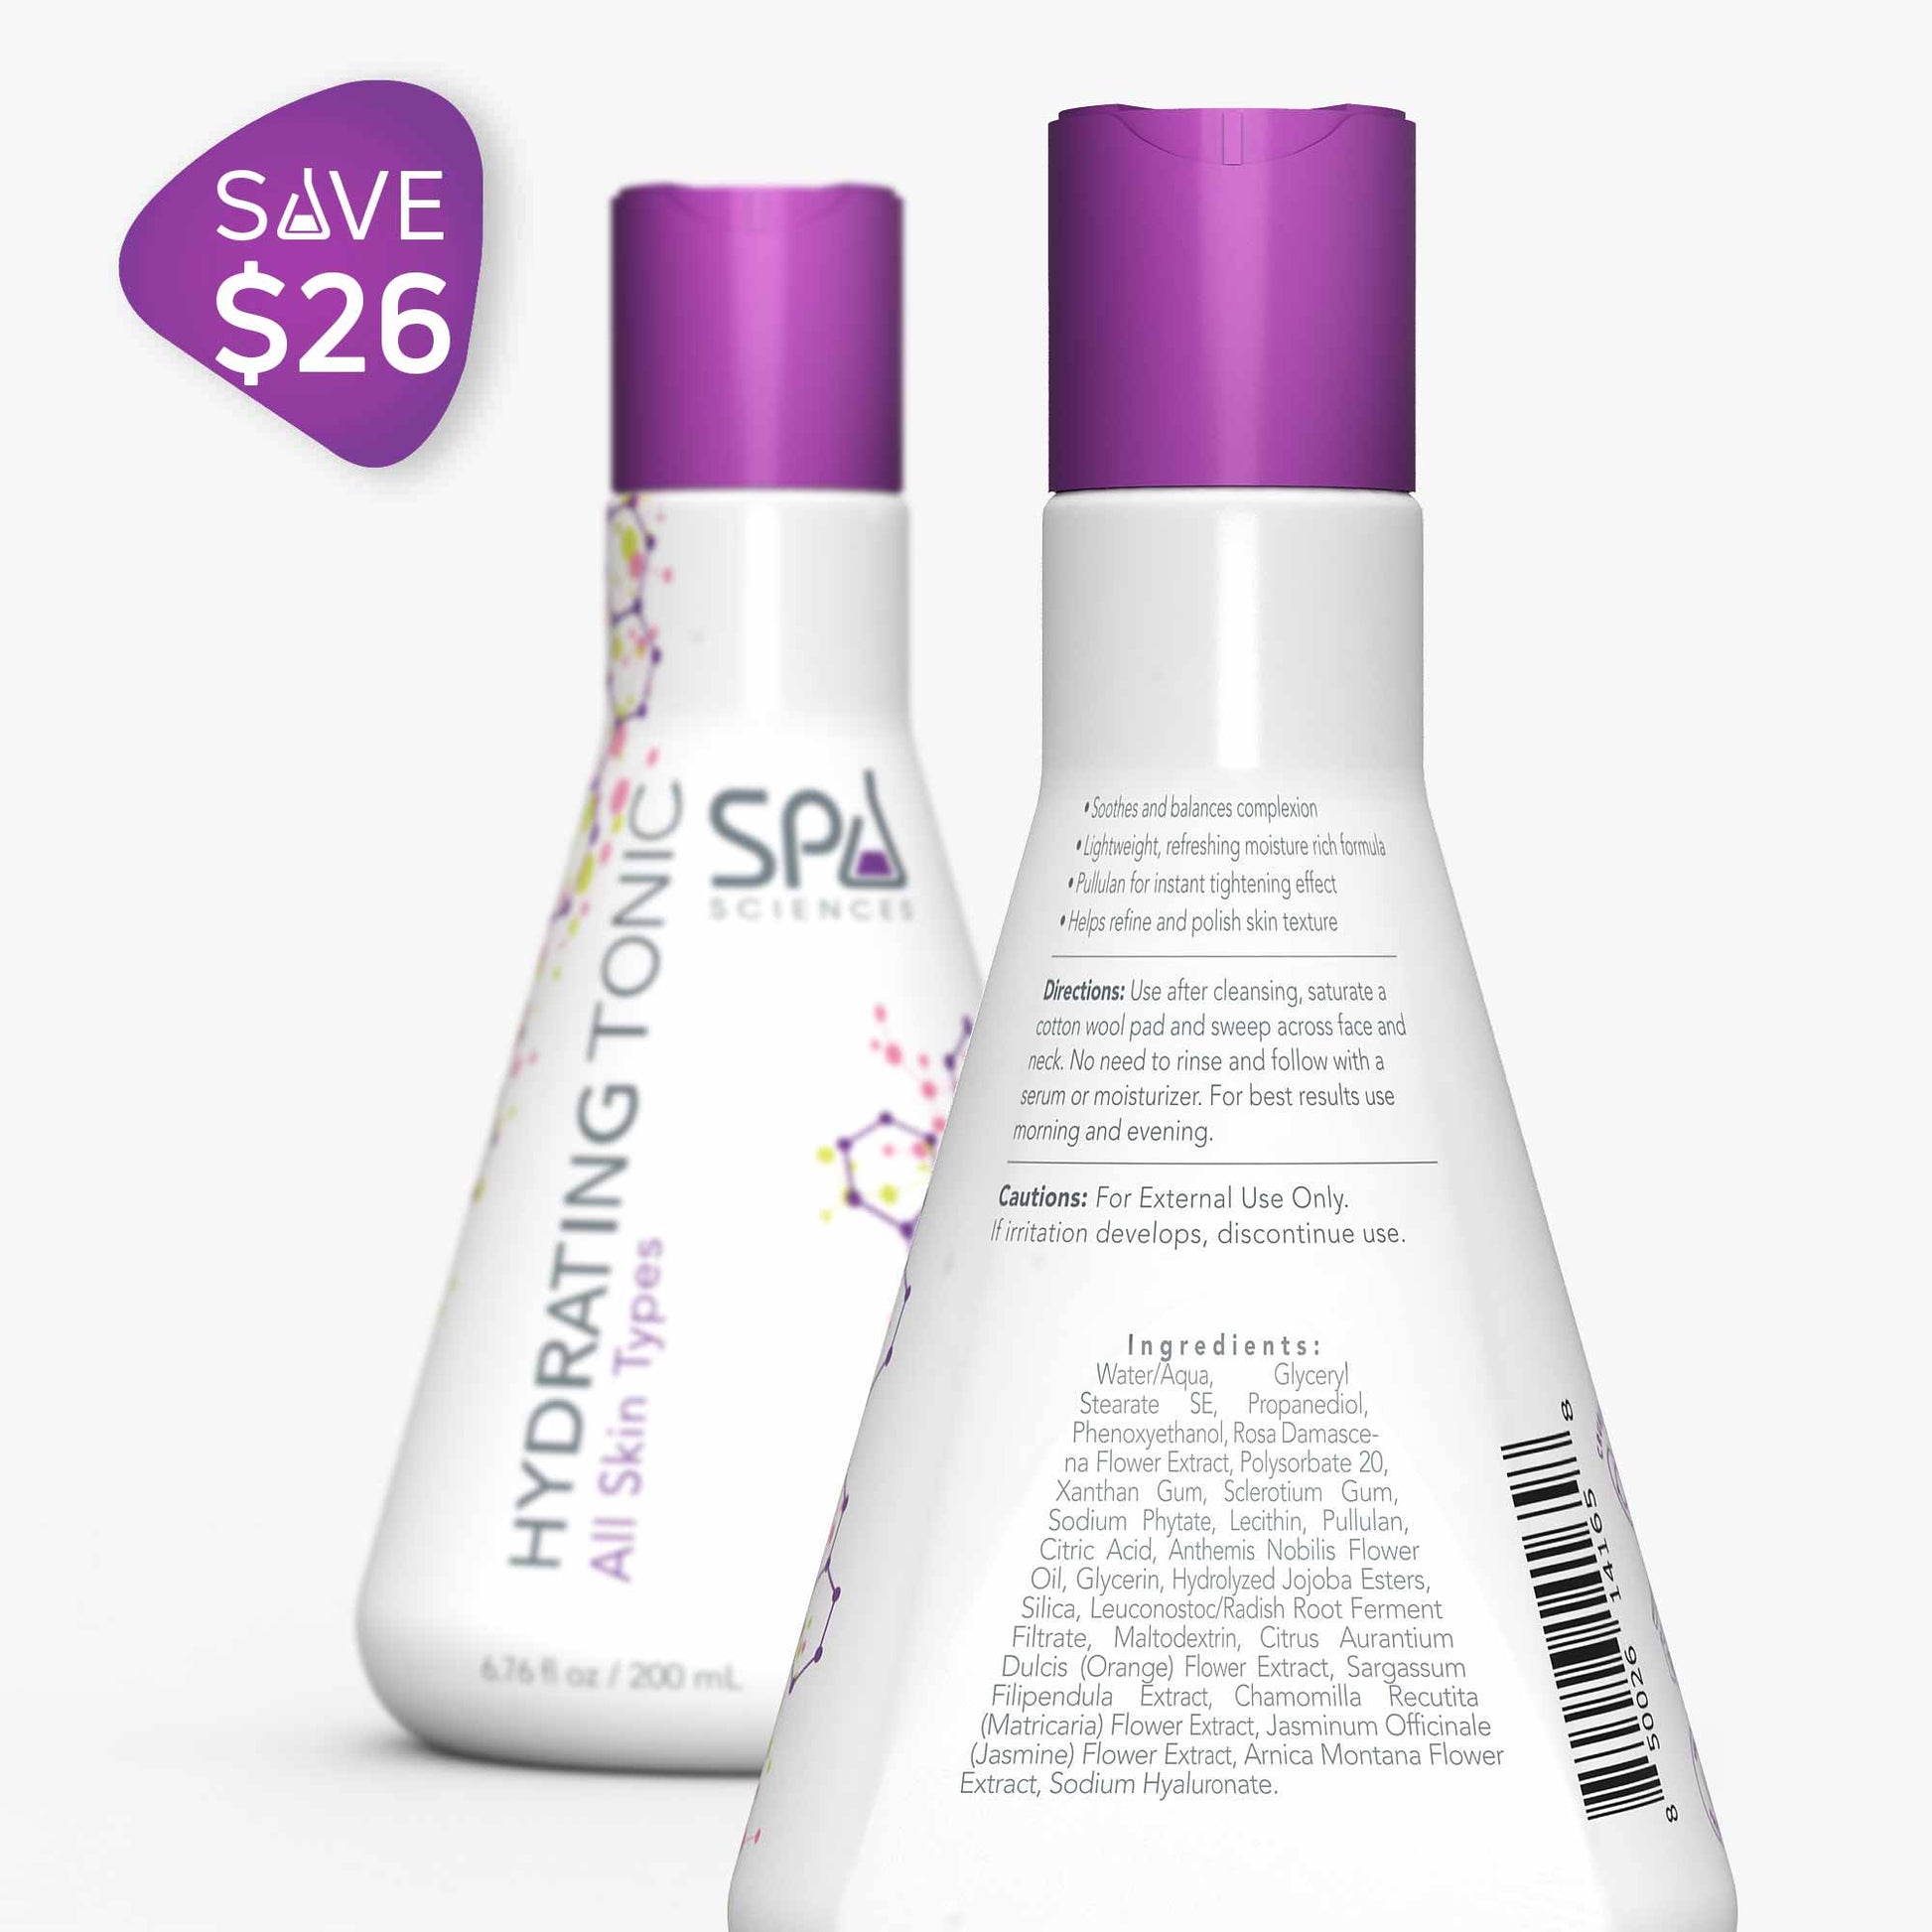 A bottle of Spa Sciences' Hydration Hero on a white background.